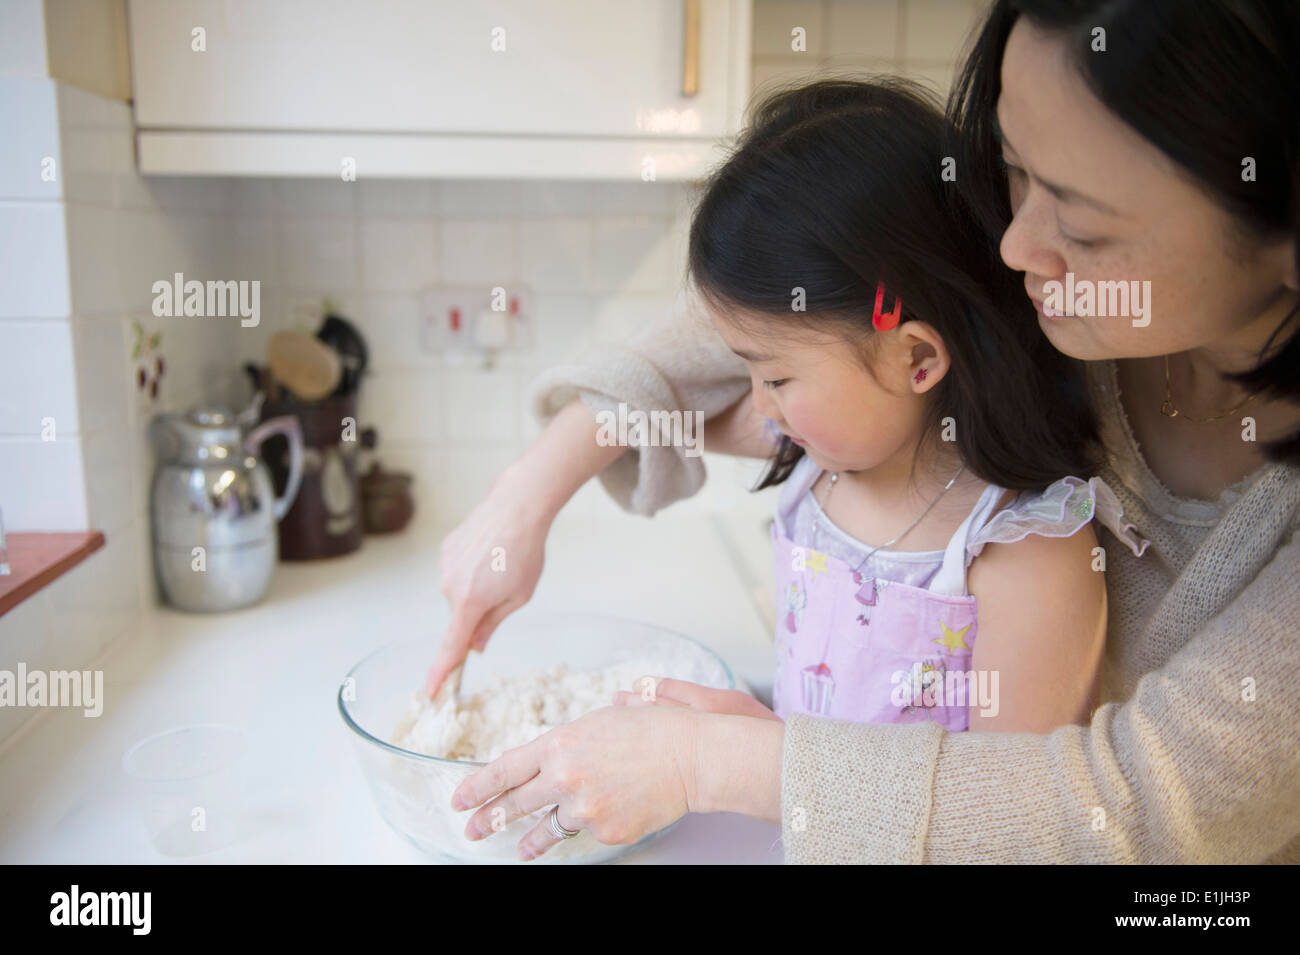 Mother and daughter in kitchen, mixing ingredients in bowl Stock Photo